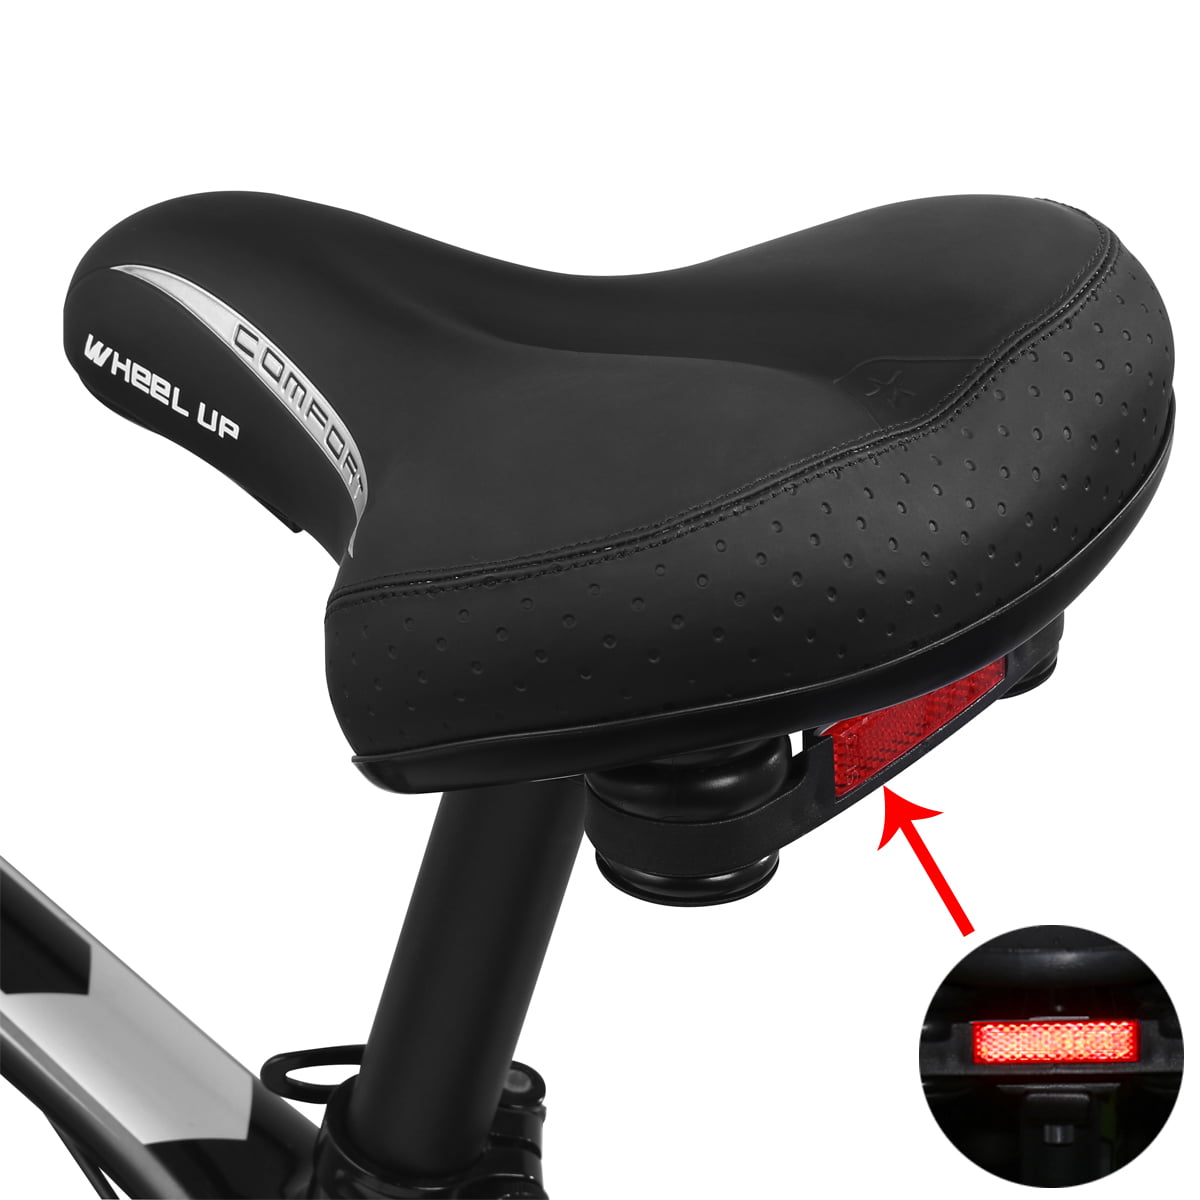 Comfort Breathable Extra Wide Big+Bum Bike Bicycle Soft Pad Saddle Seat Cushions